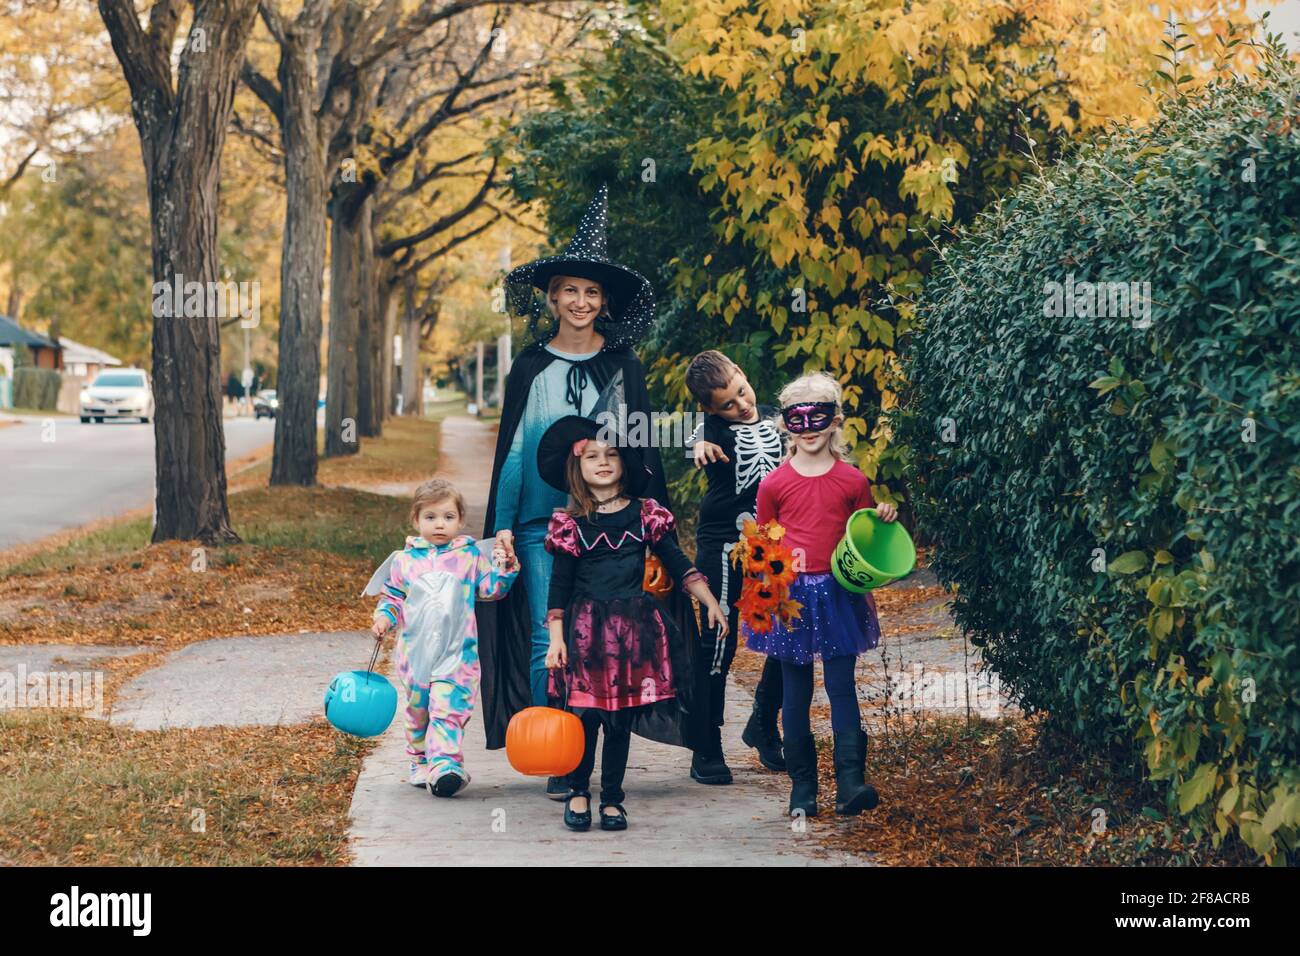 Trick or treat. Mother with children going to trick or treat on Halloween holiday. Mom with kids in party costumes with baskets going to neighbourhood Stock Photo